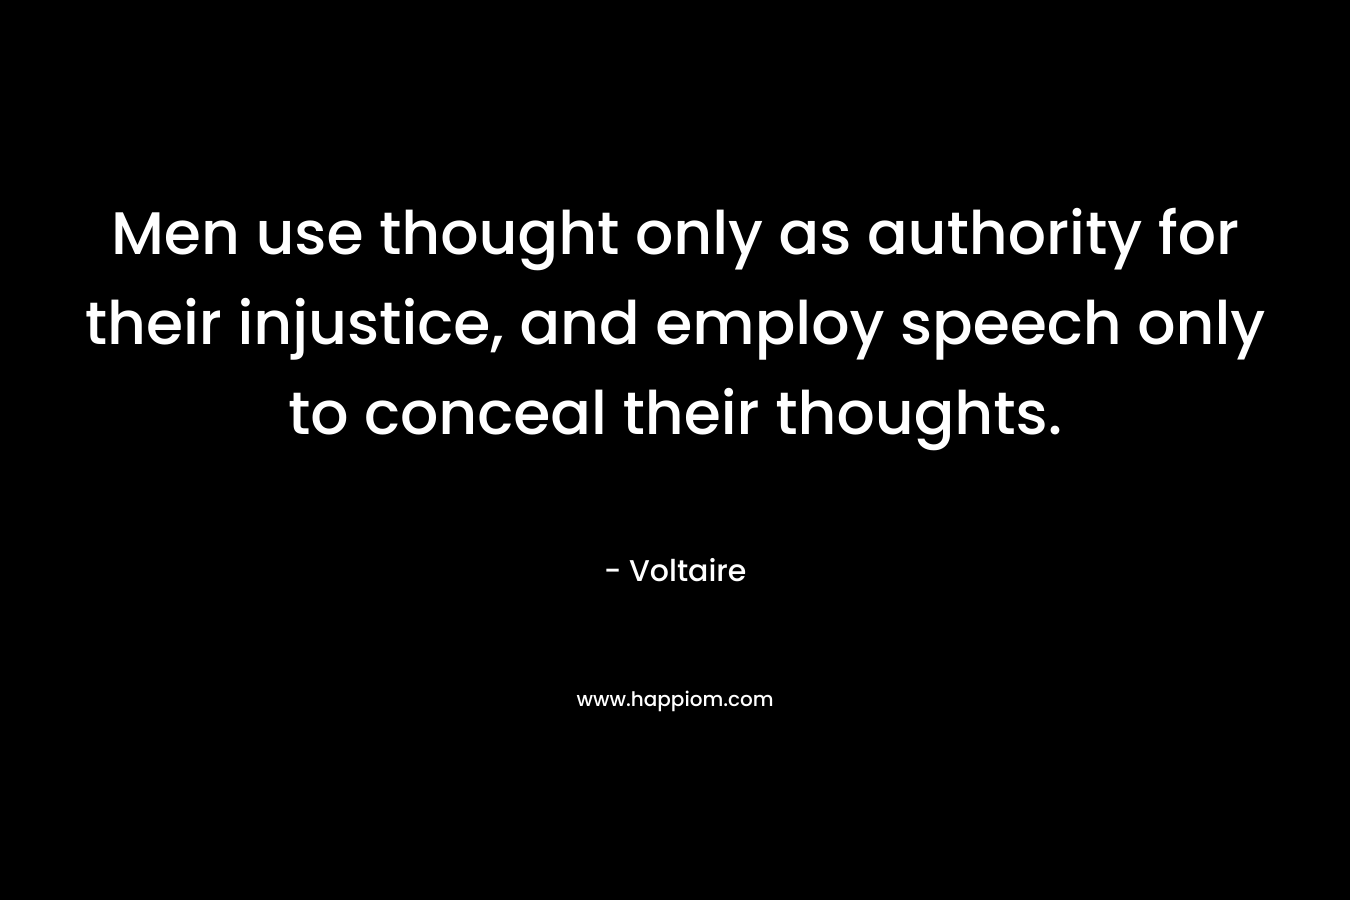 Men use thought only as authority for their injustice, and employ speech only to conceal their thoughts.